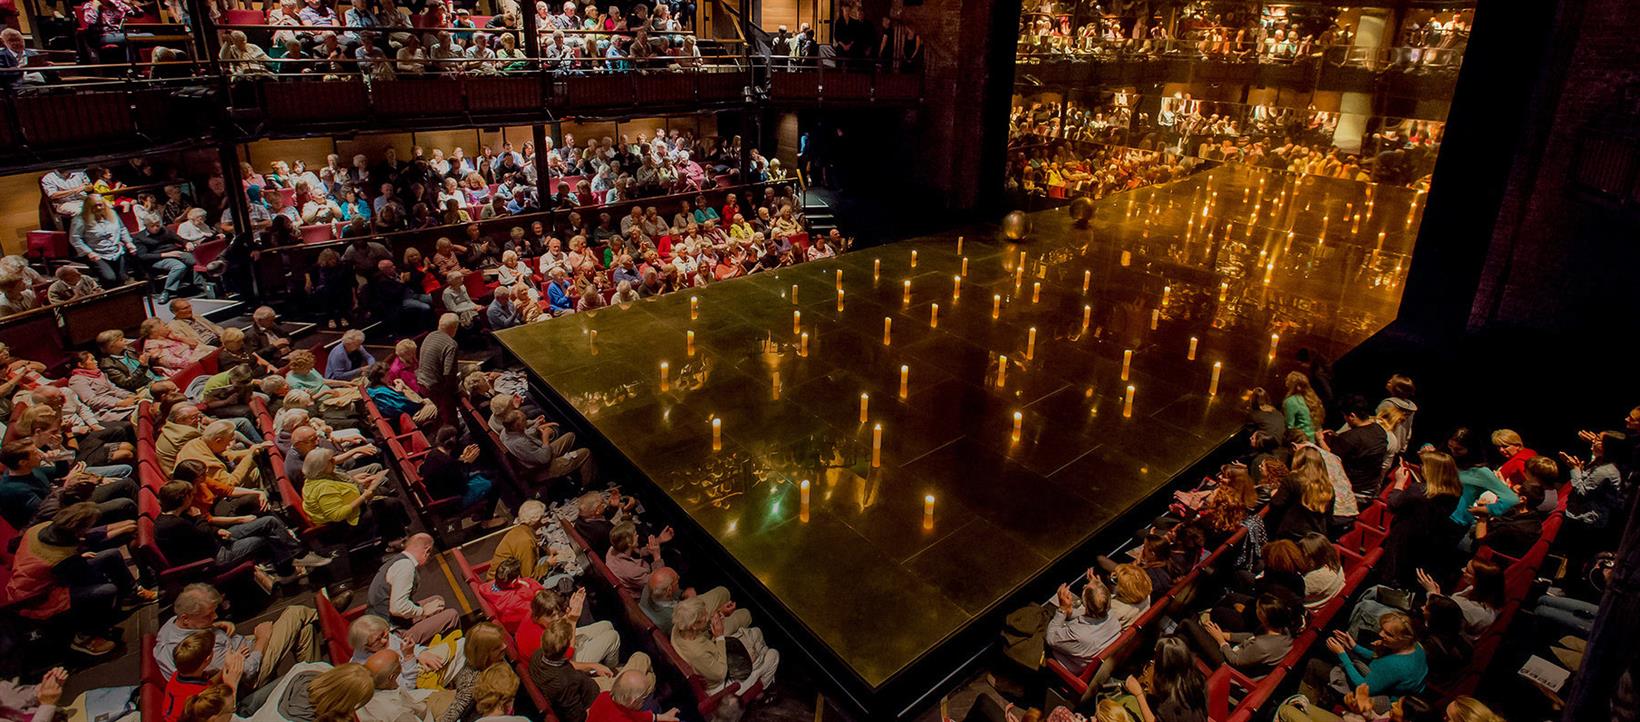 Audience at the Royal Shakespeare Theatre in Stratford-upon-Avon